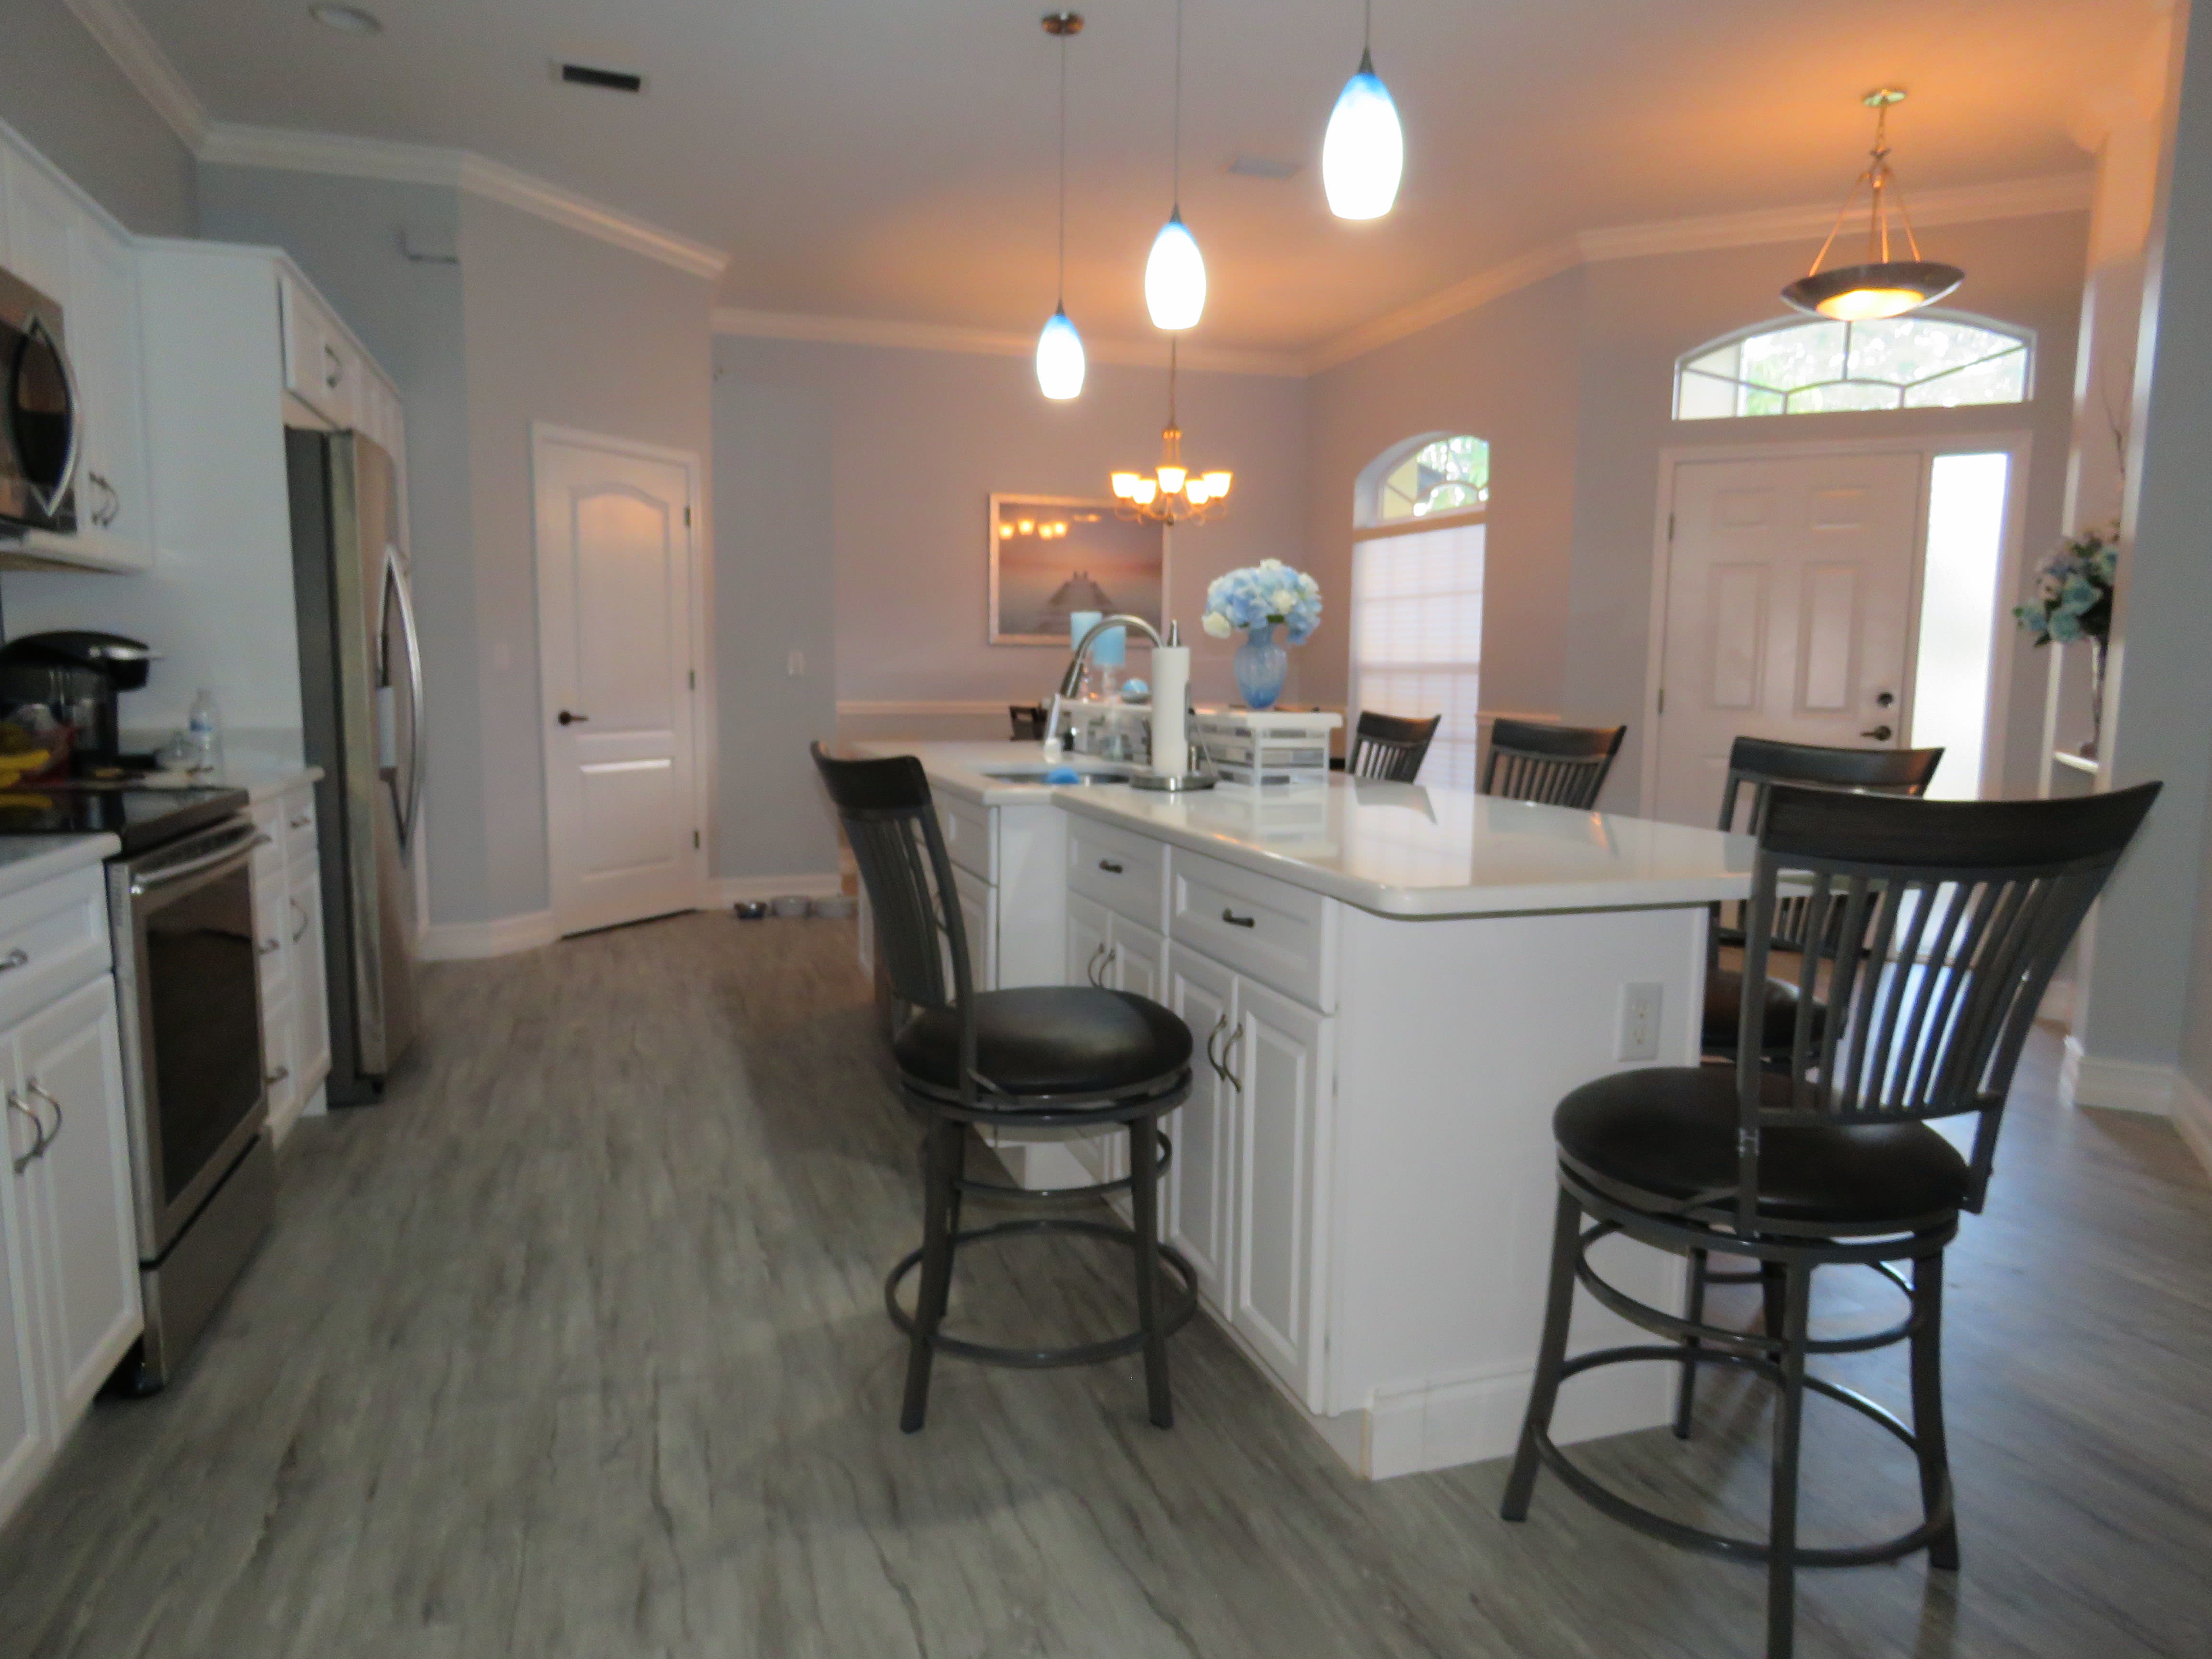 Beautiful modern kitchen flooring from Independent Floor Covering located in Marysville, MI